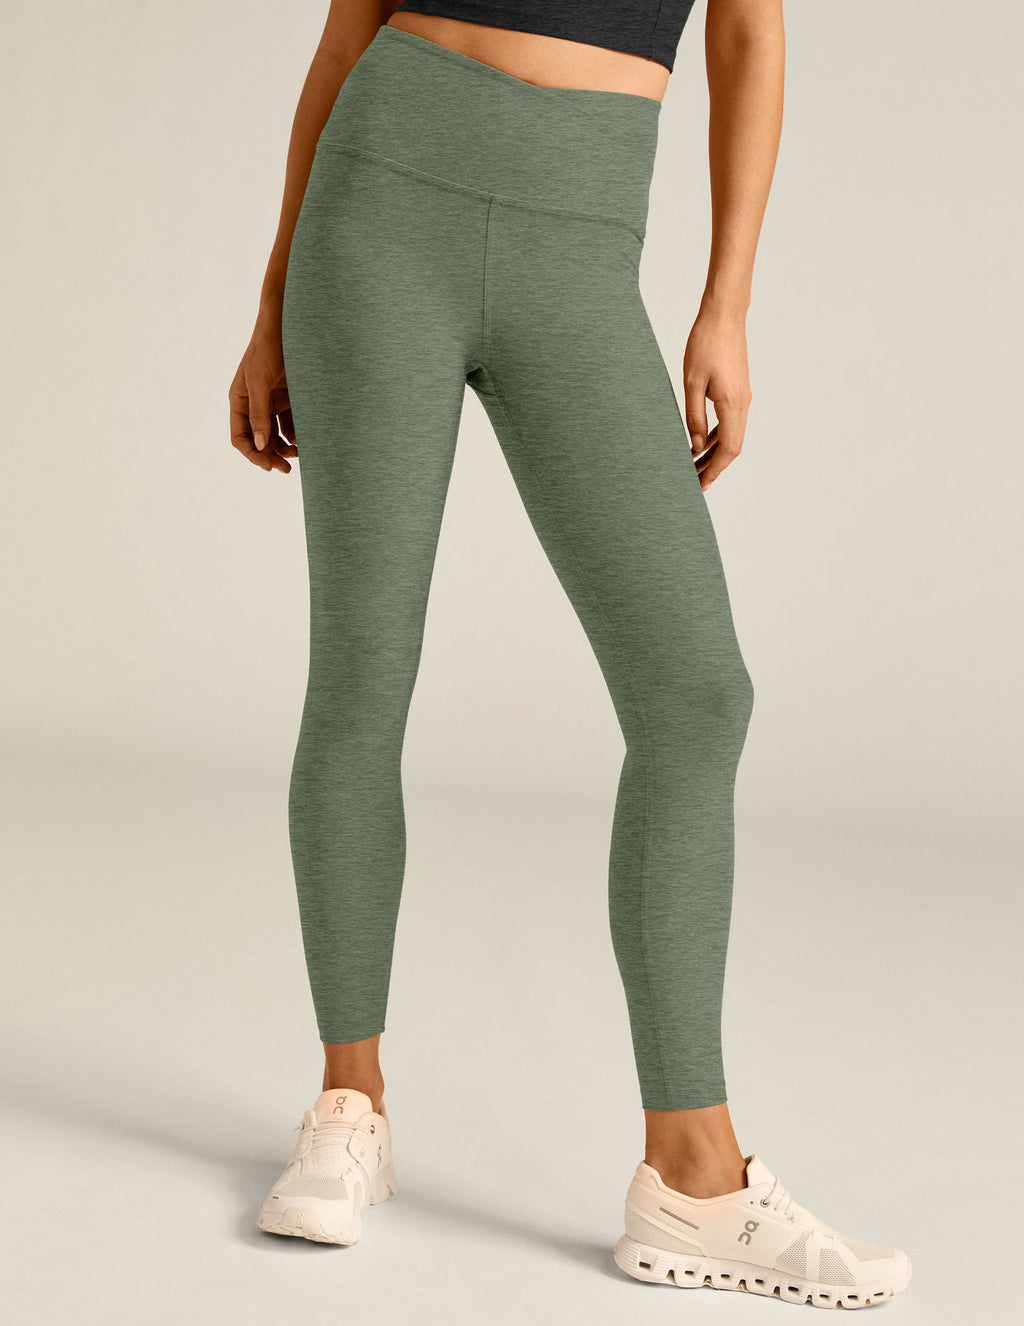 Do you or do you not wear underwear with yoga pants?! – POPFLEX®